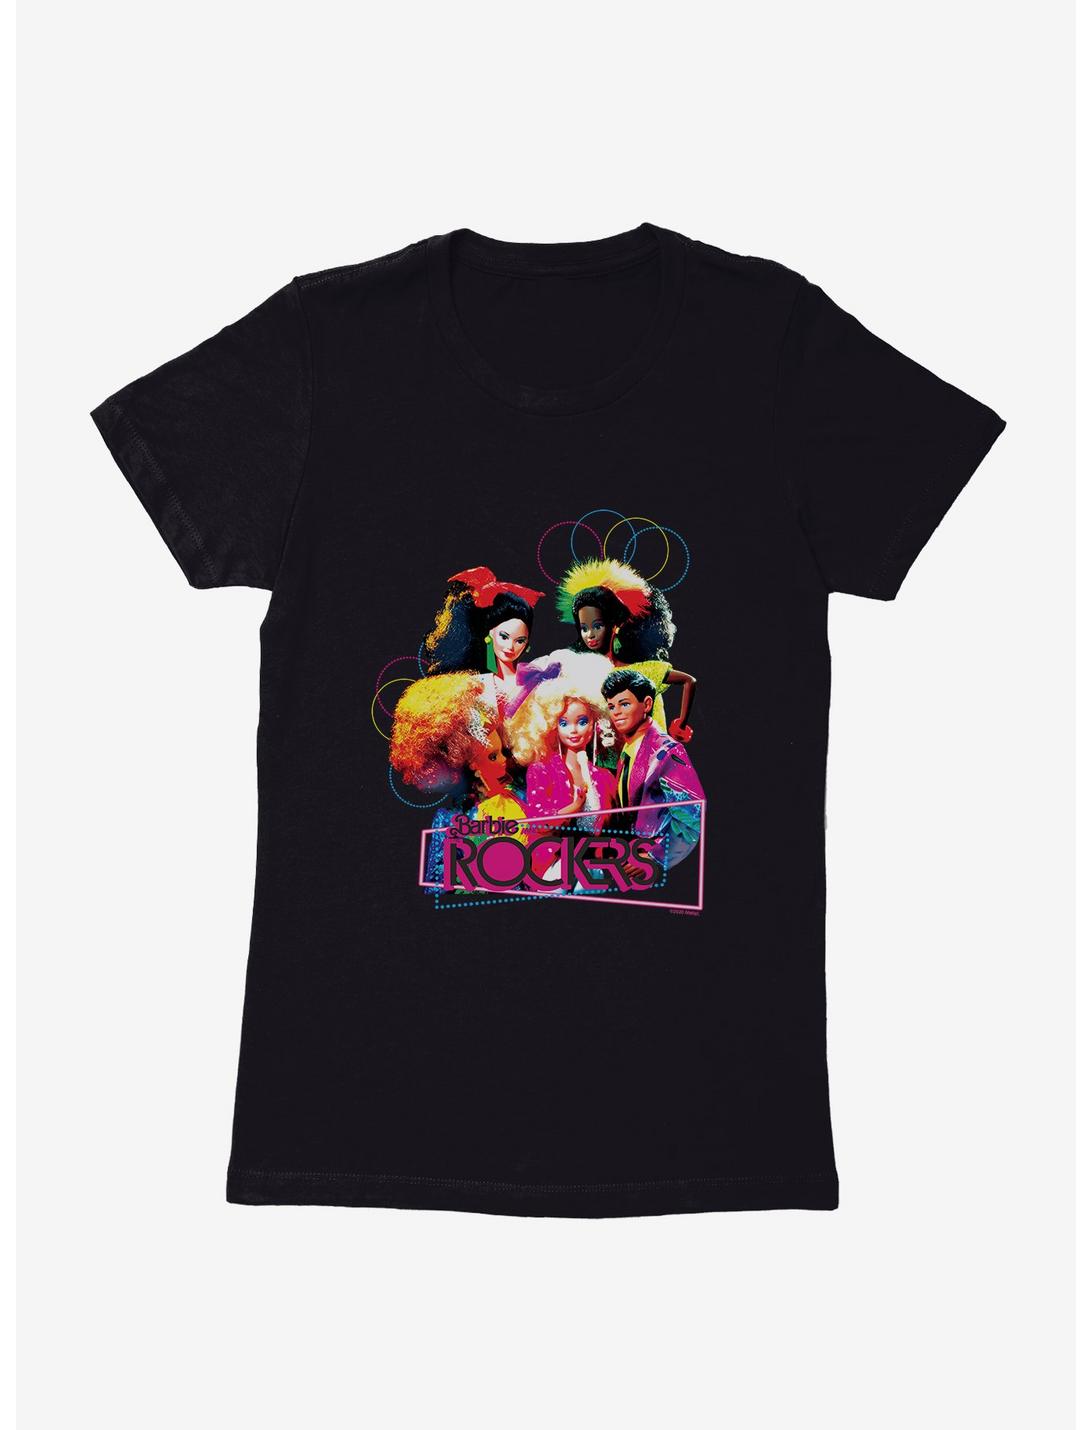 Barbie And The Rockers Neon Glam Womens T-Shirt, BLACK, hi-res